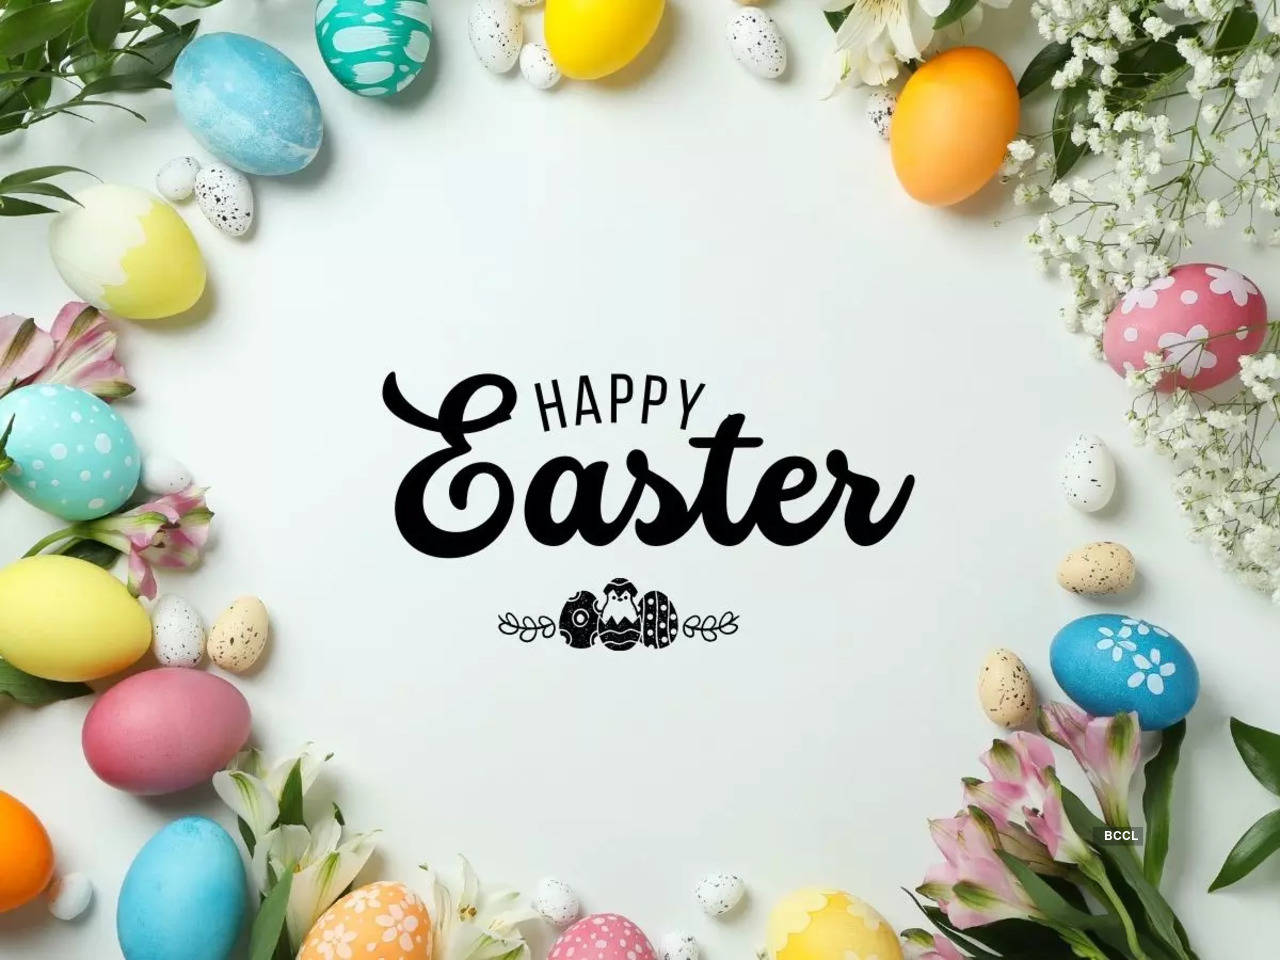 Ultimate Collection of Easter Images Over 999 Stunning 4K Easter Images